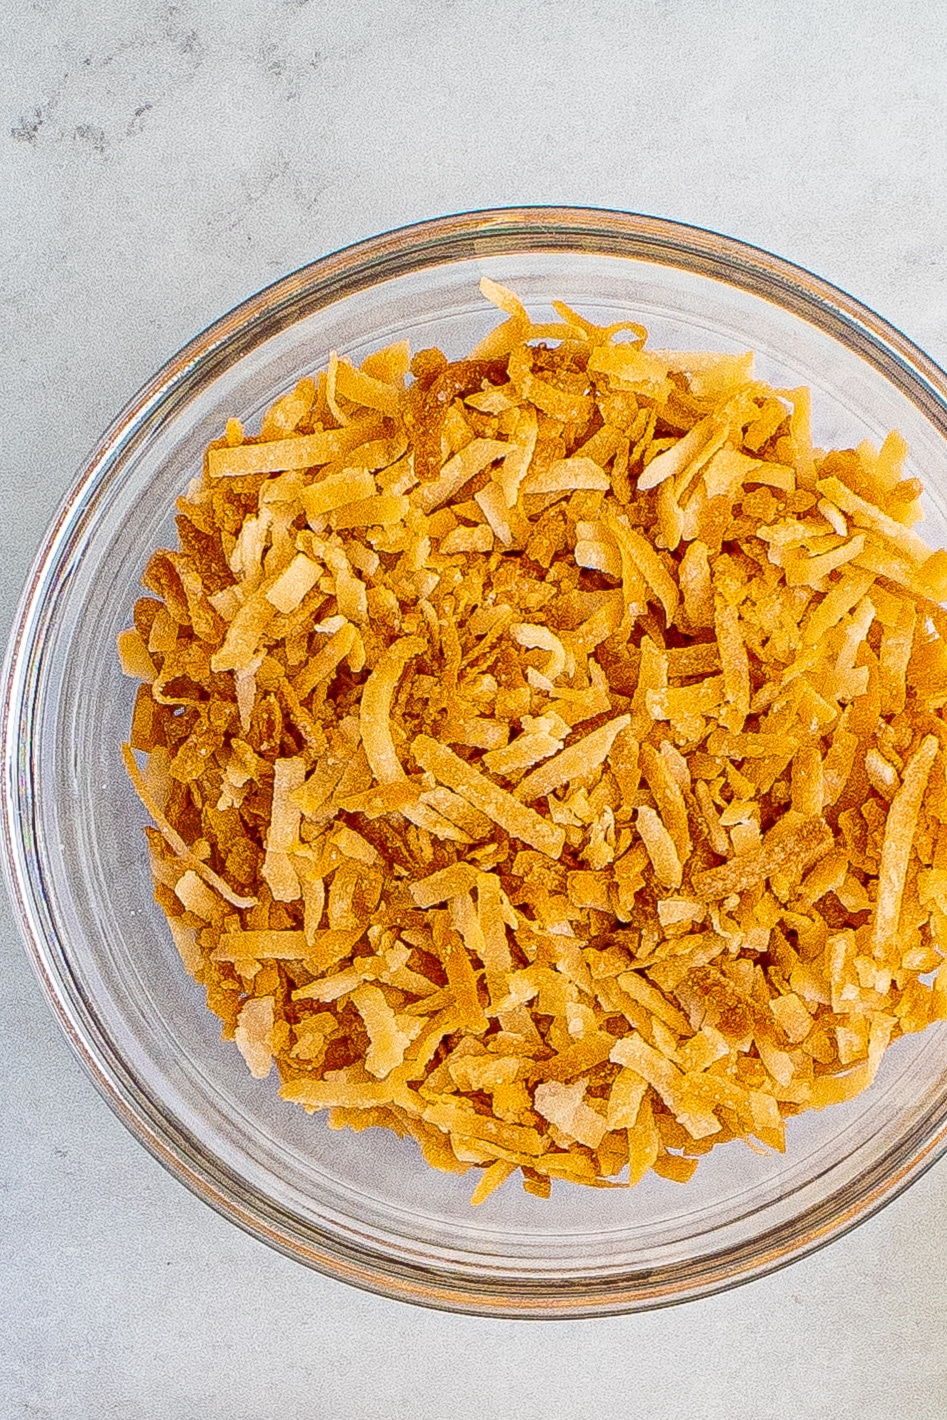 A clear glass bowl of toasted coconut flakes on a white marble countertop.